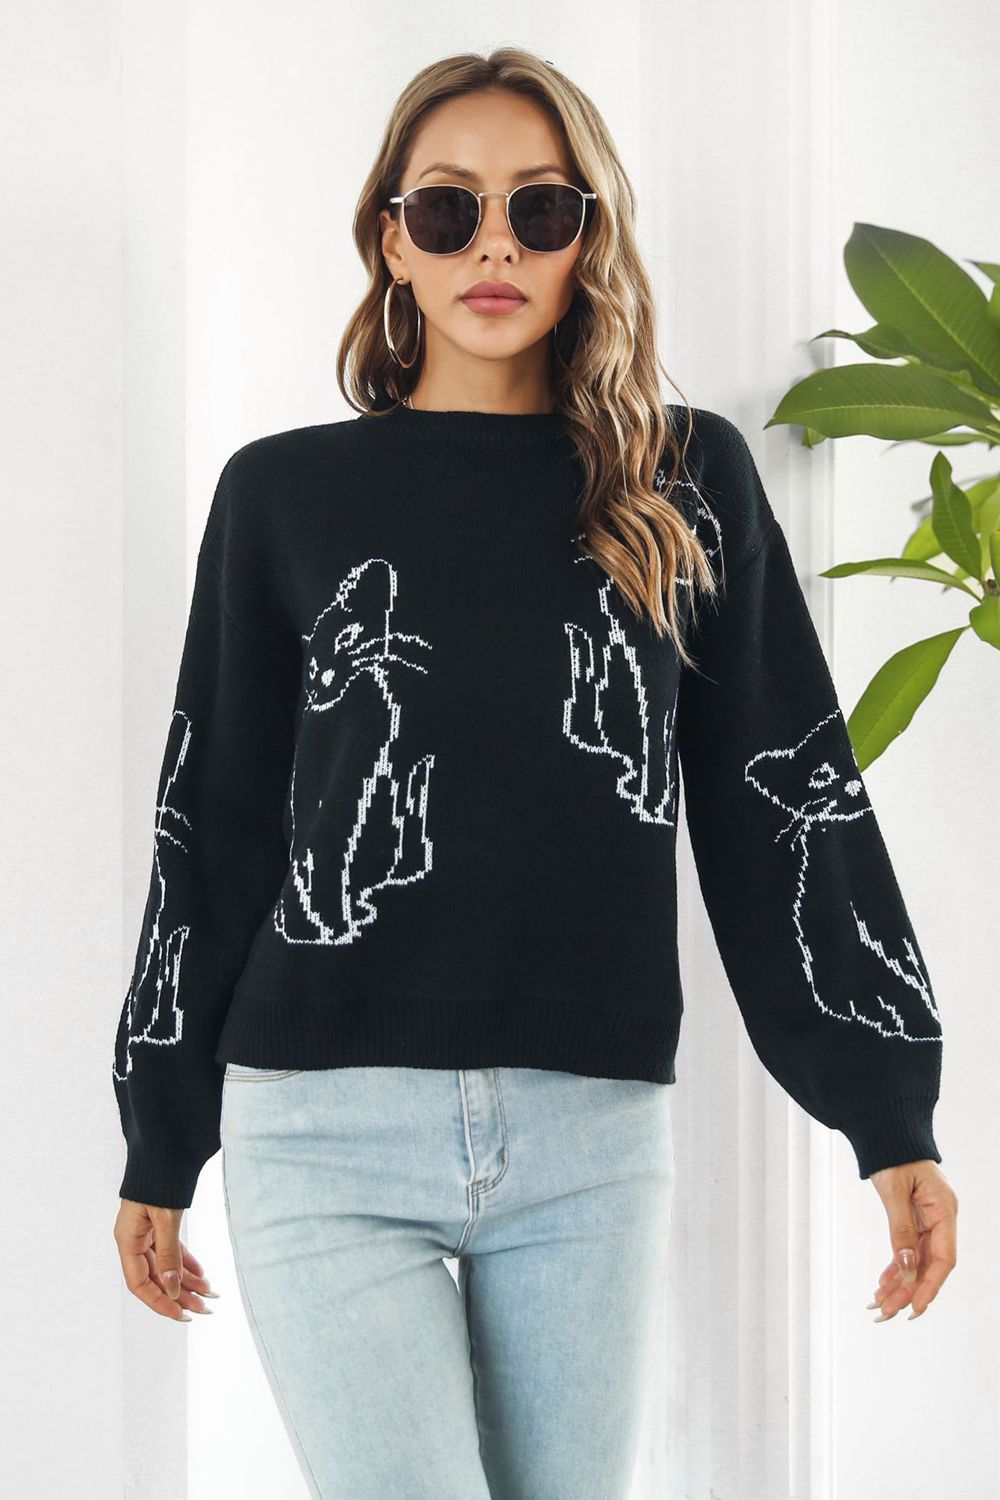 Cat Pattern Round Neck Long Sleeve Pullover Sweater - FunkyPeacockStore (Store description)